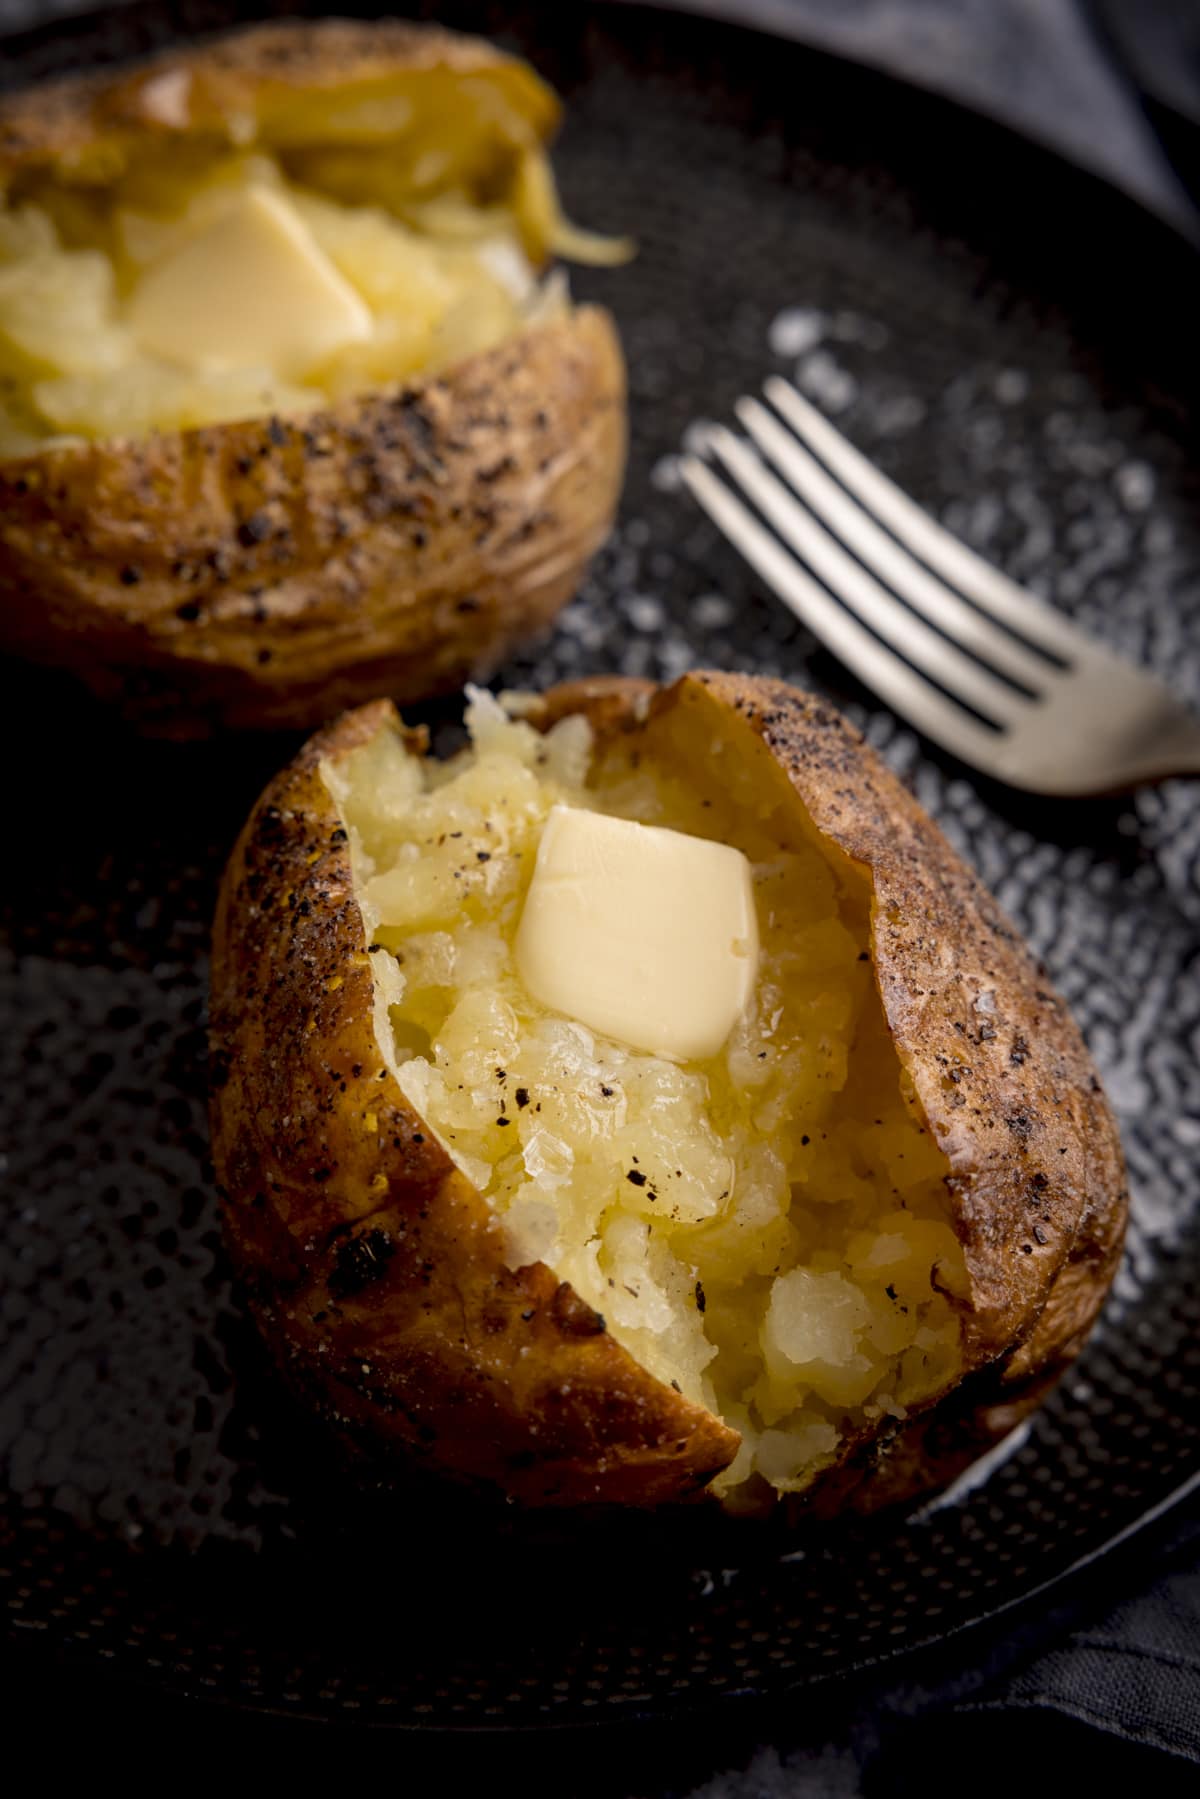 A seasoned baked potato, sliced down the middle on a black textured plate. The inside of the potato has been fluffed and there's a knob of melting butter inside. There is a silver fork just in view on the right of the frame and a second baked potato just in view at the top left of the frame.